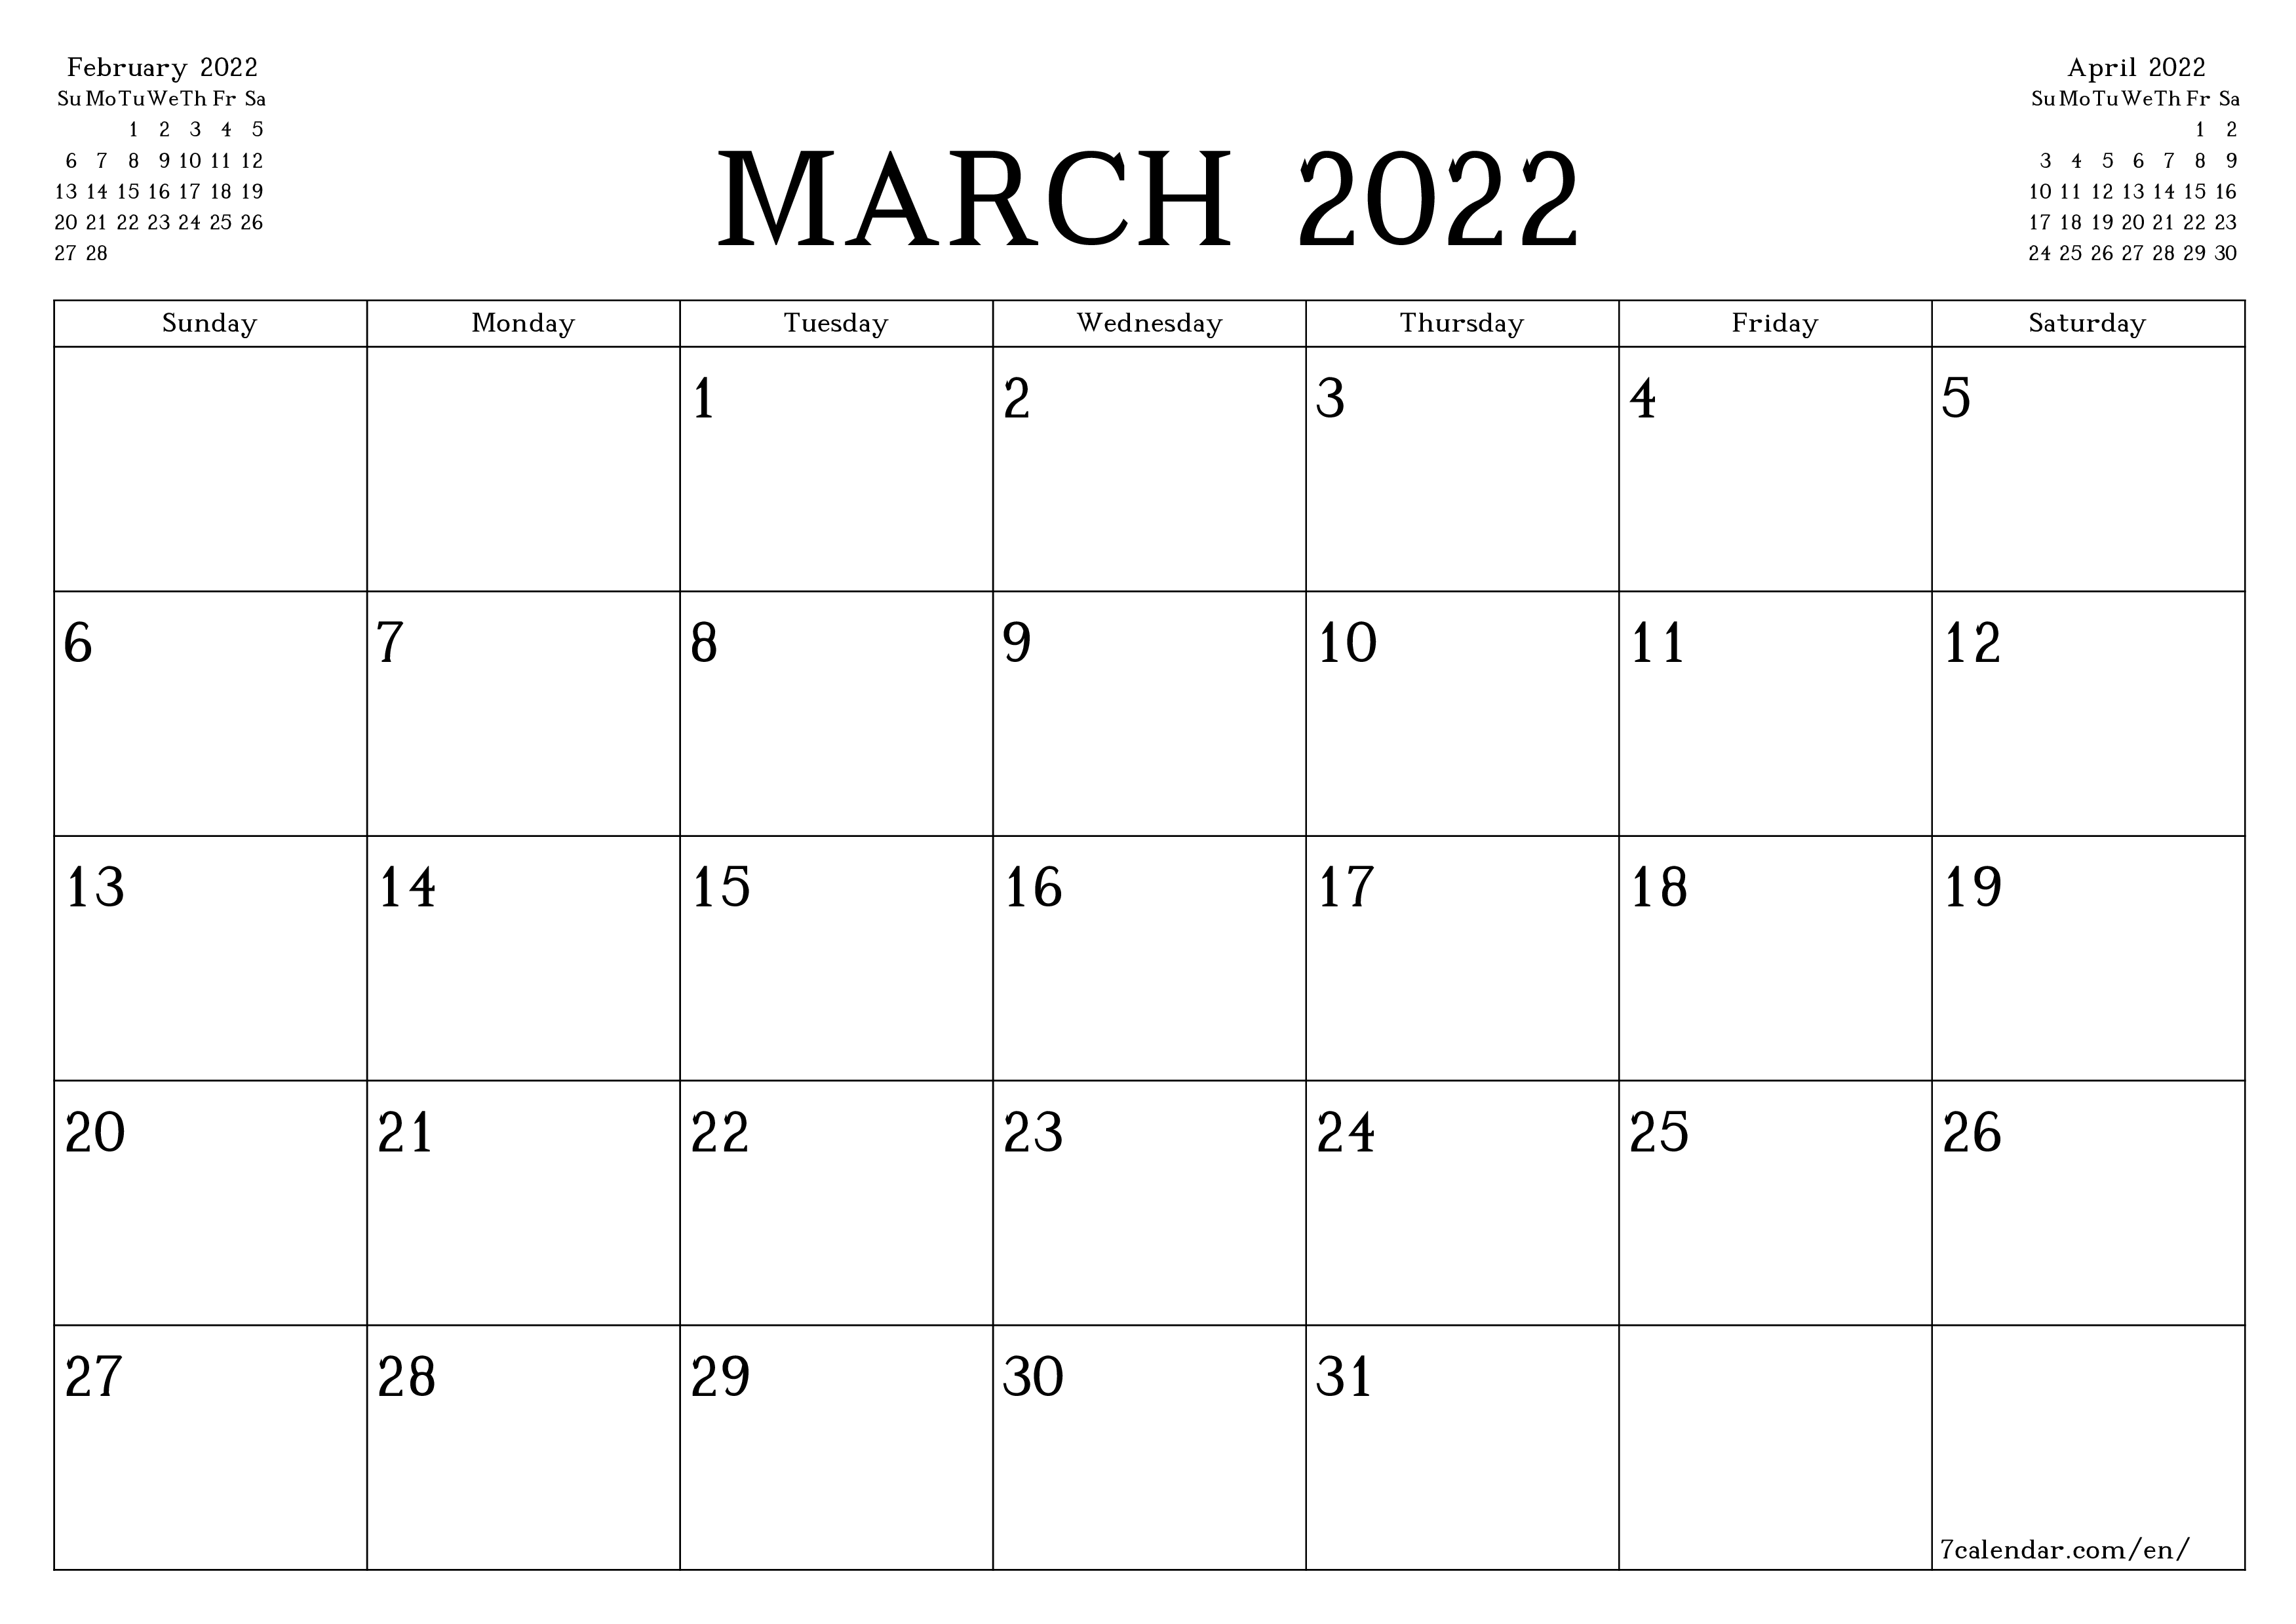 Print Monthly Calendar 2022 March 2022 Free Printable Calendars And Planners, Pdf Templates - 7Calendar